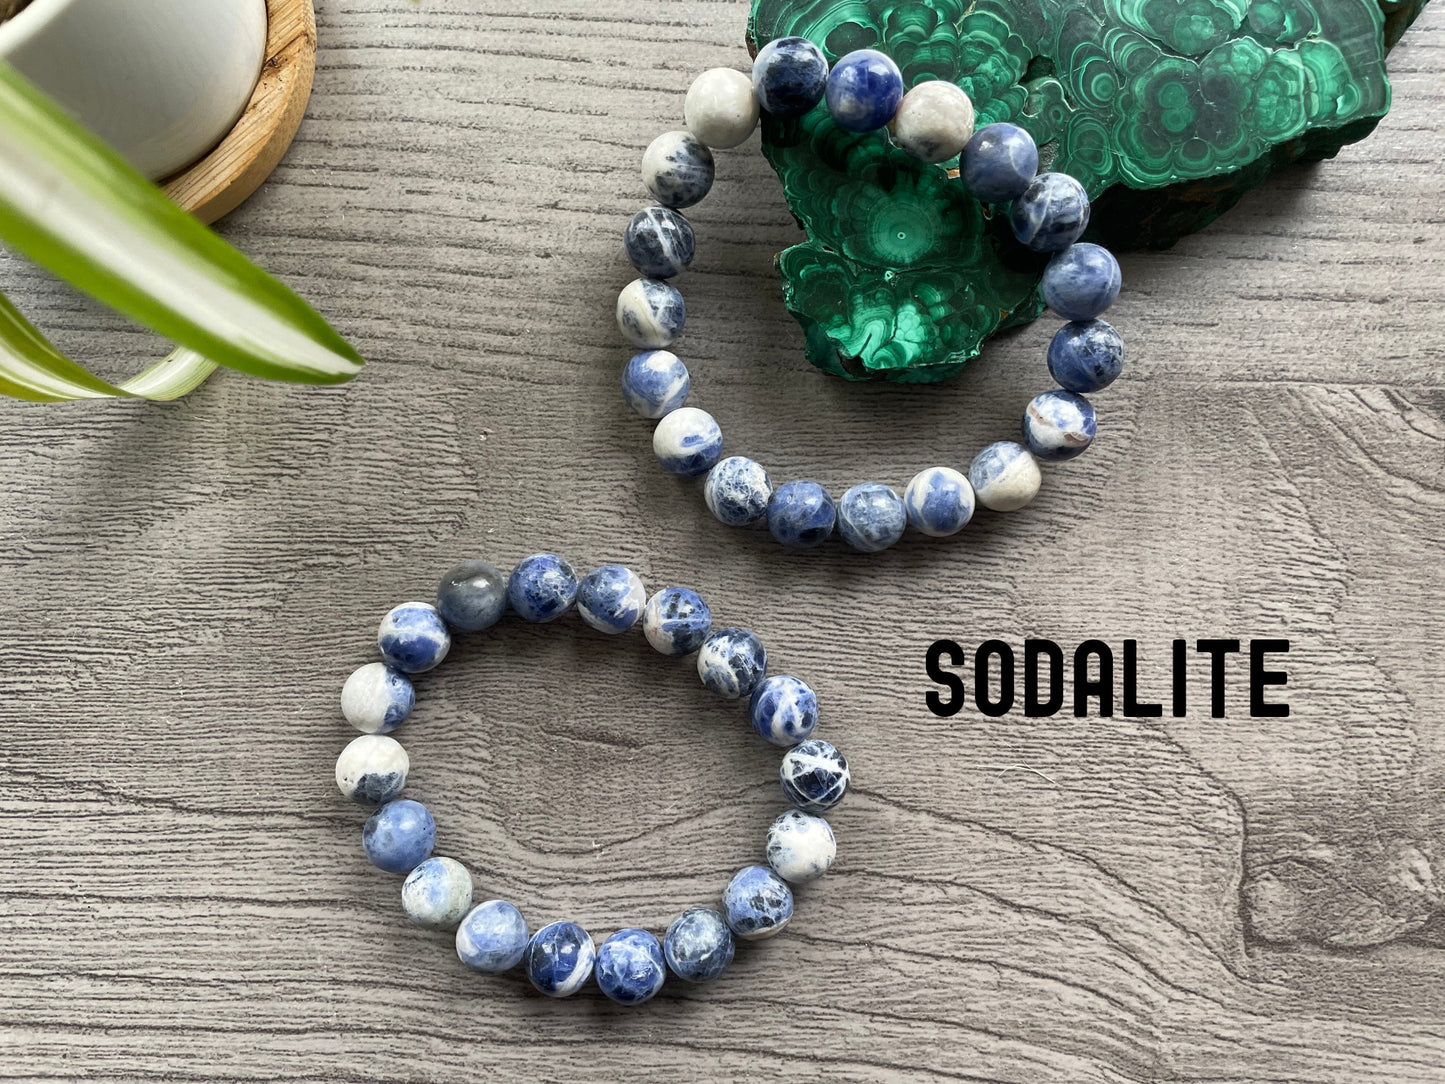 Pictured is a sodalite bead bracelet.